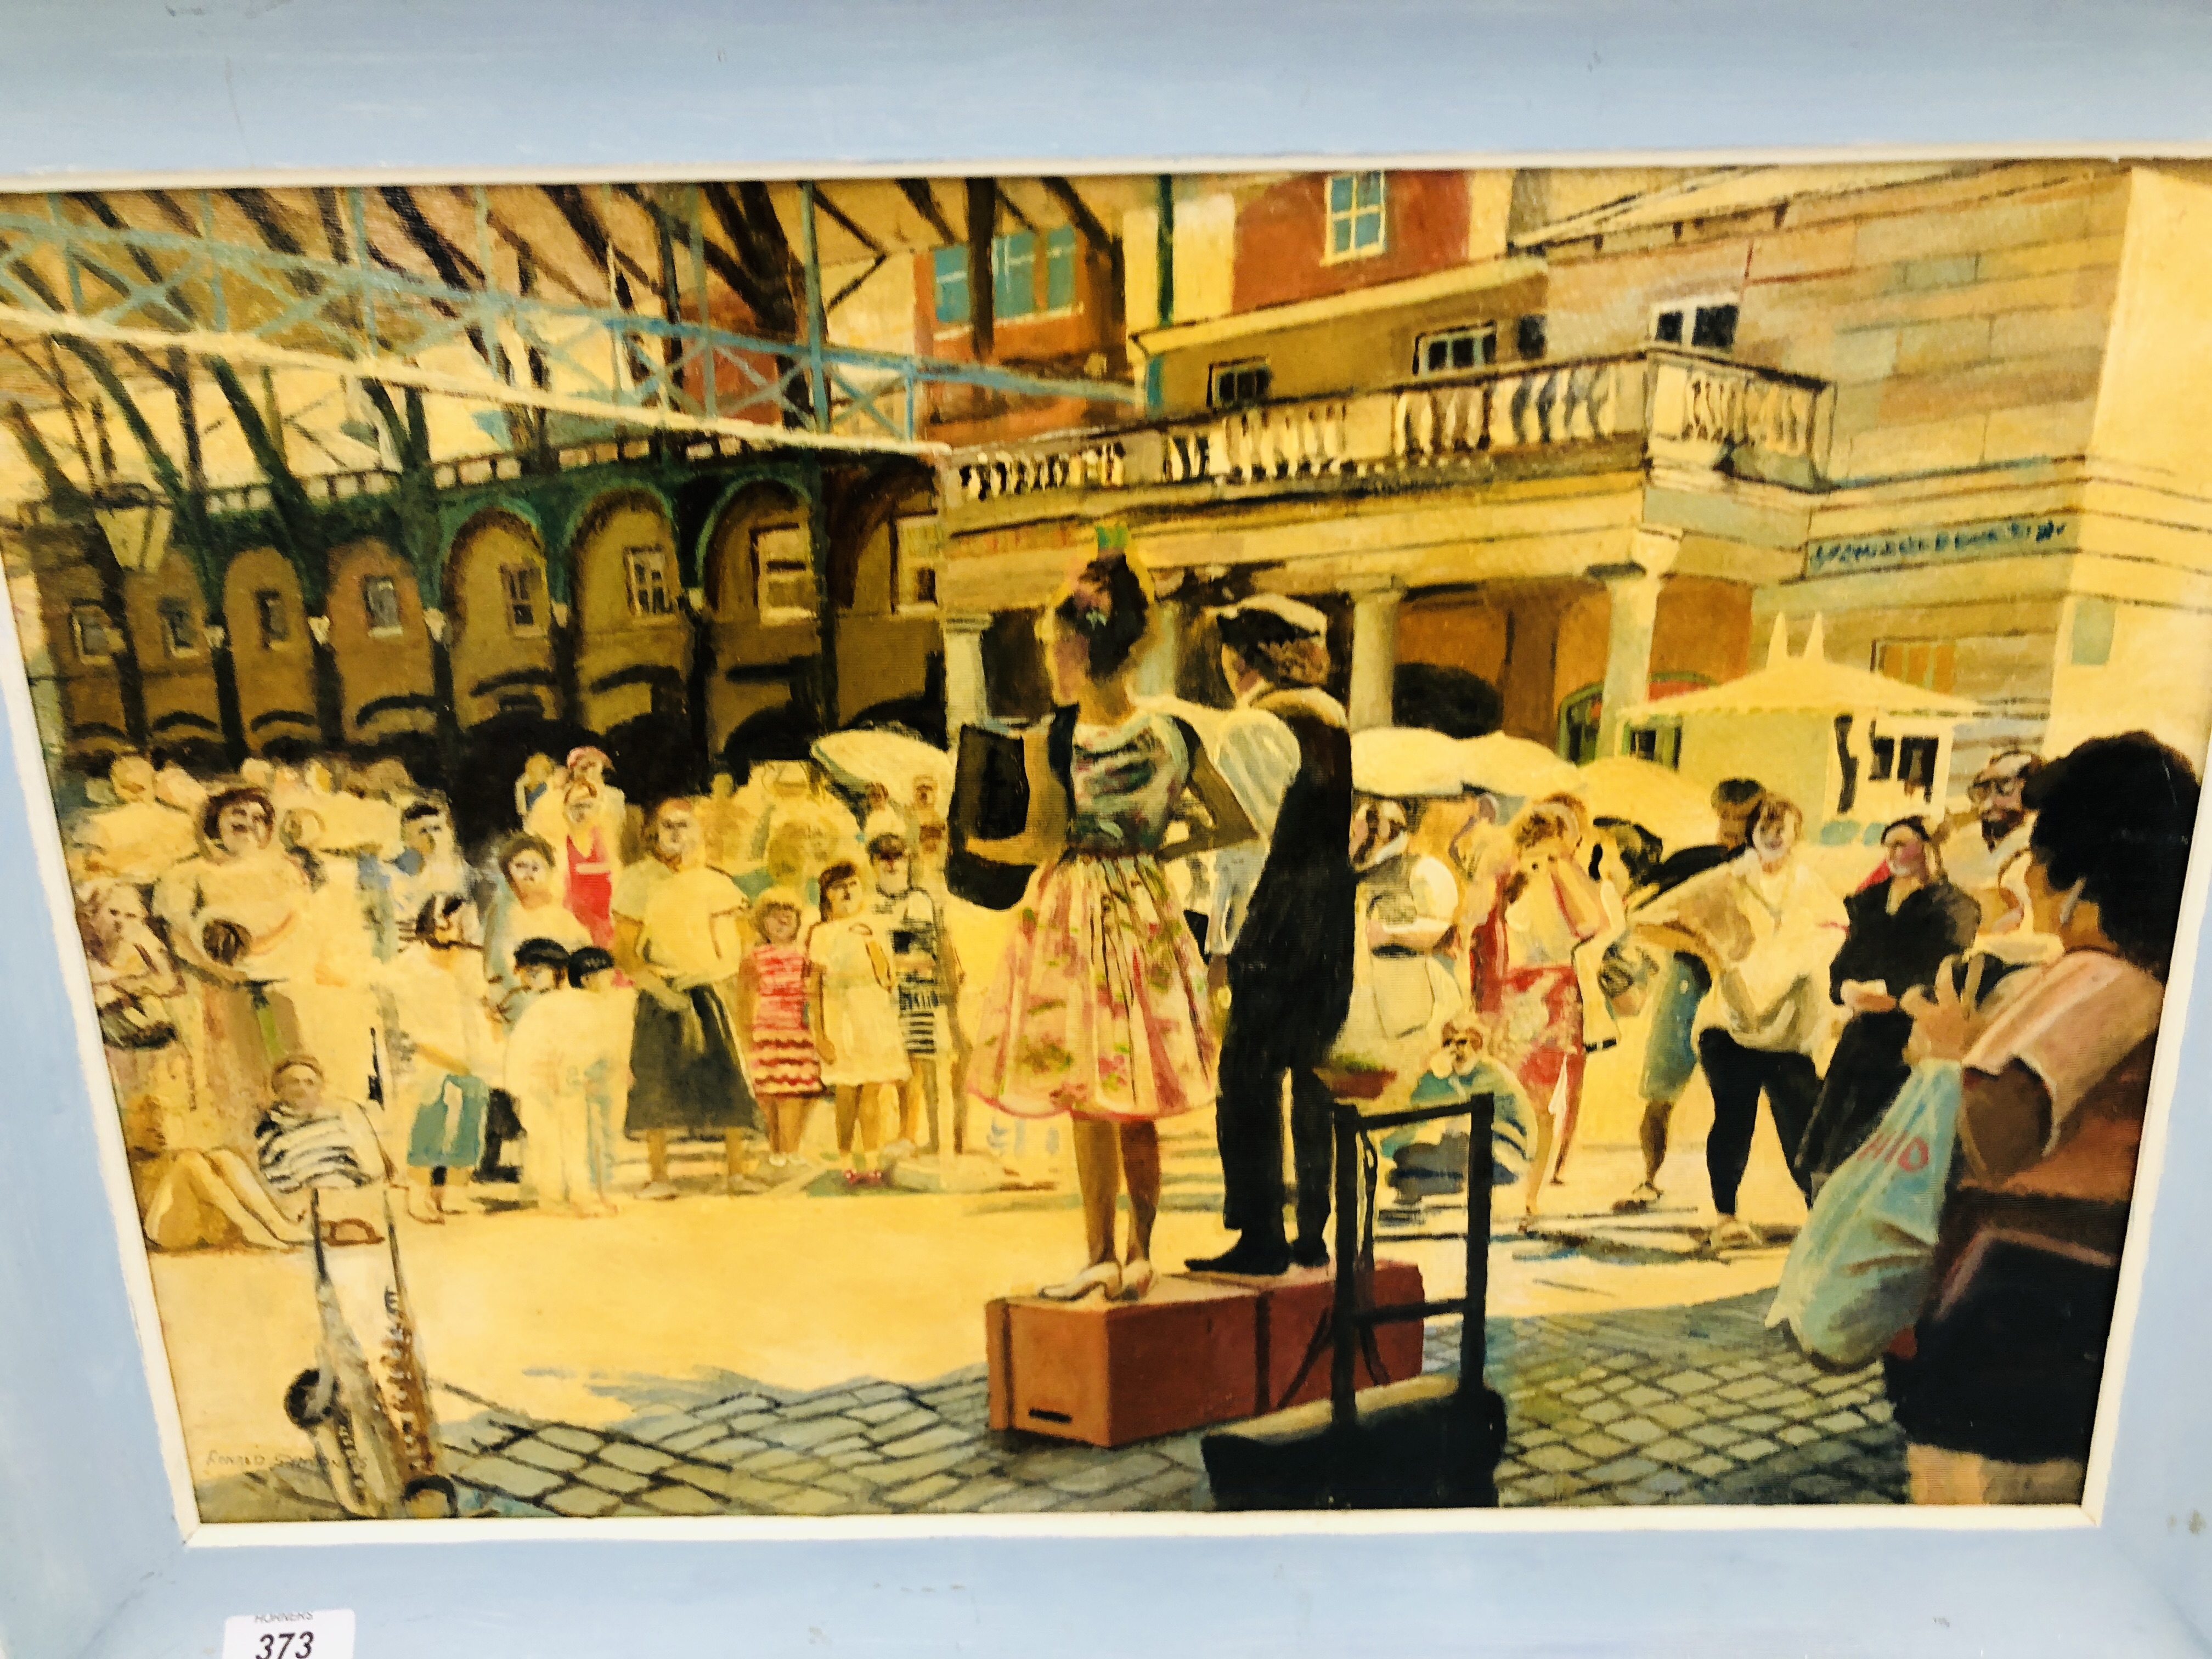 FRAMED AND MOUNTED OIL ON BOARD "BUSKERS ON THORPE STATION" BEARING SIGNATURE SIMONDS - Image 2 of 4